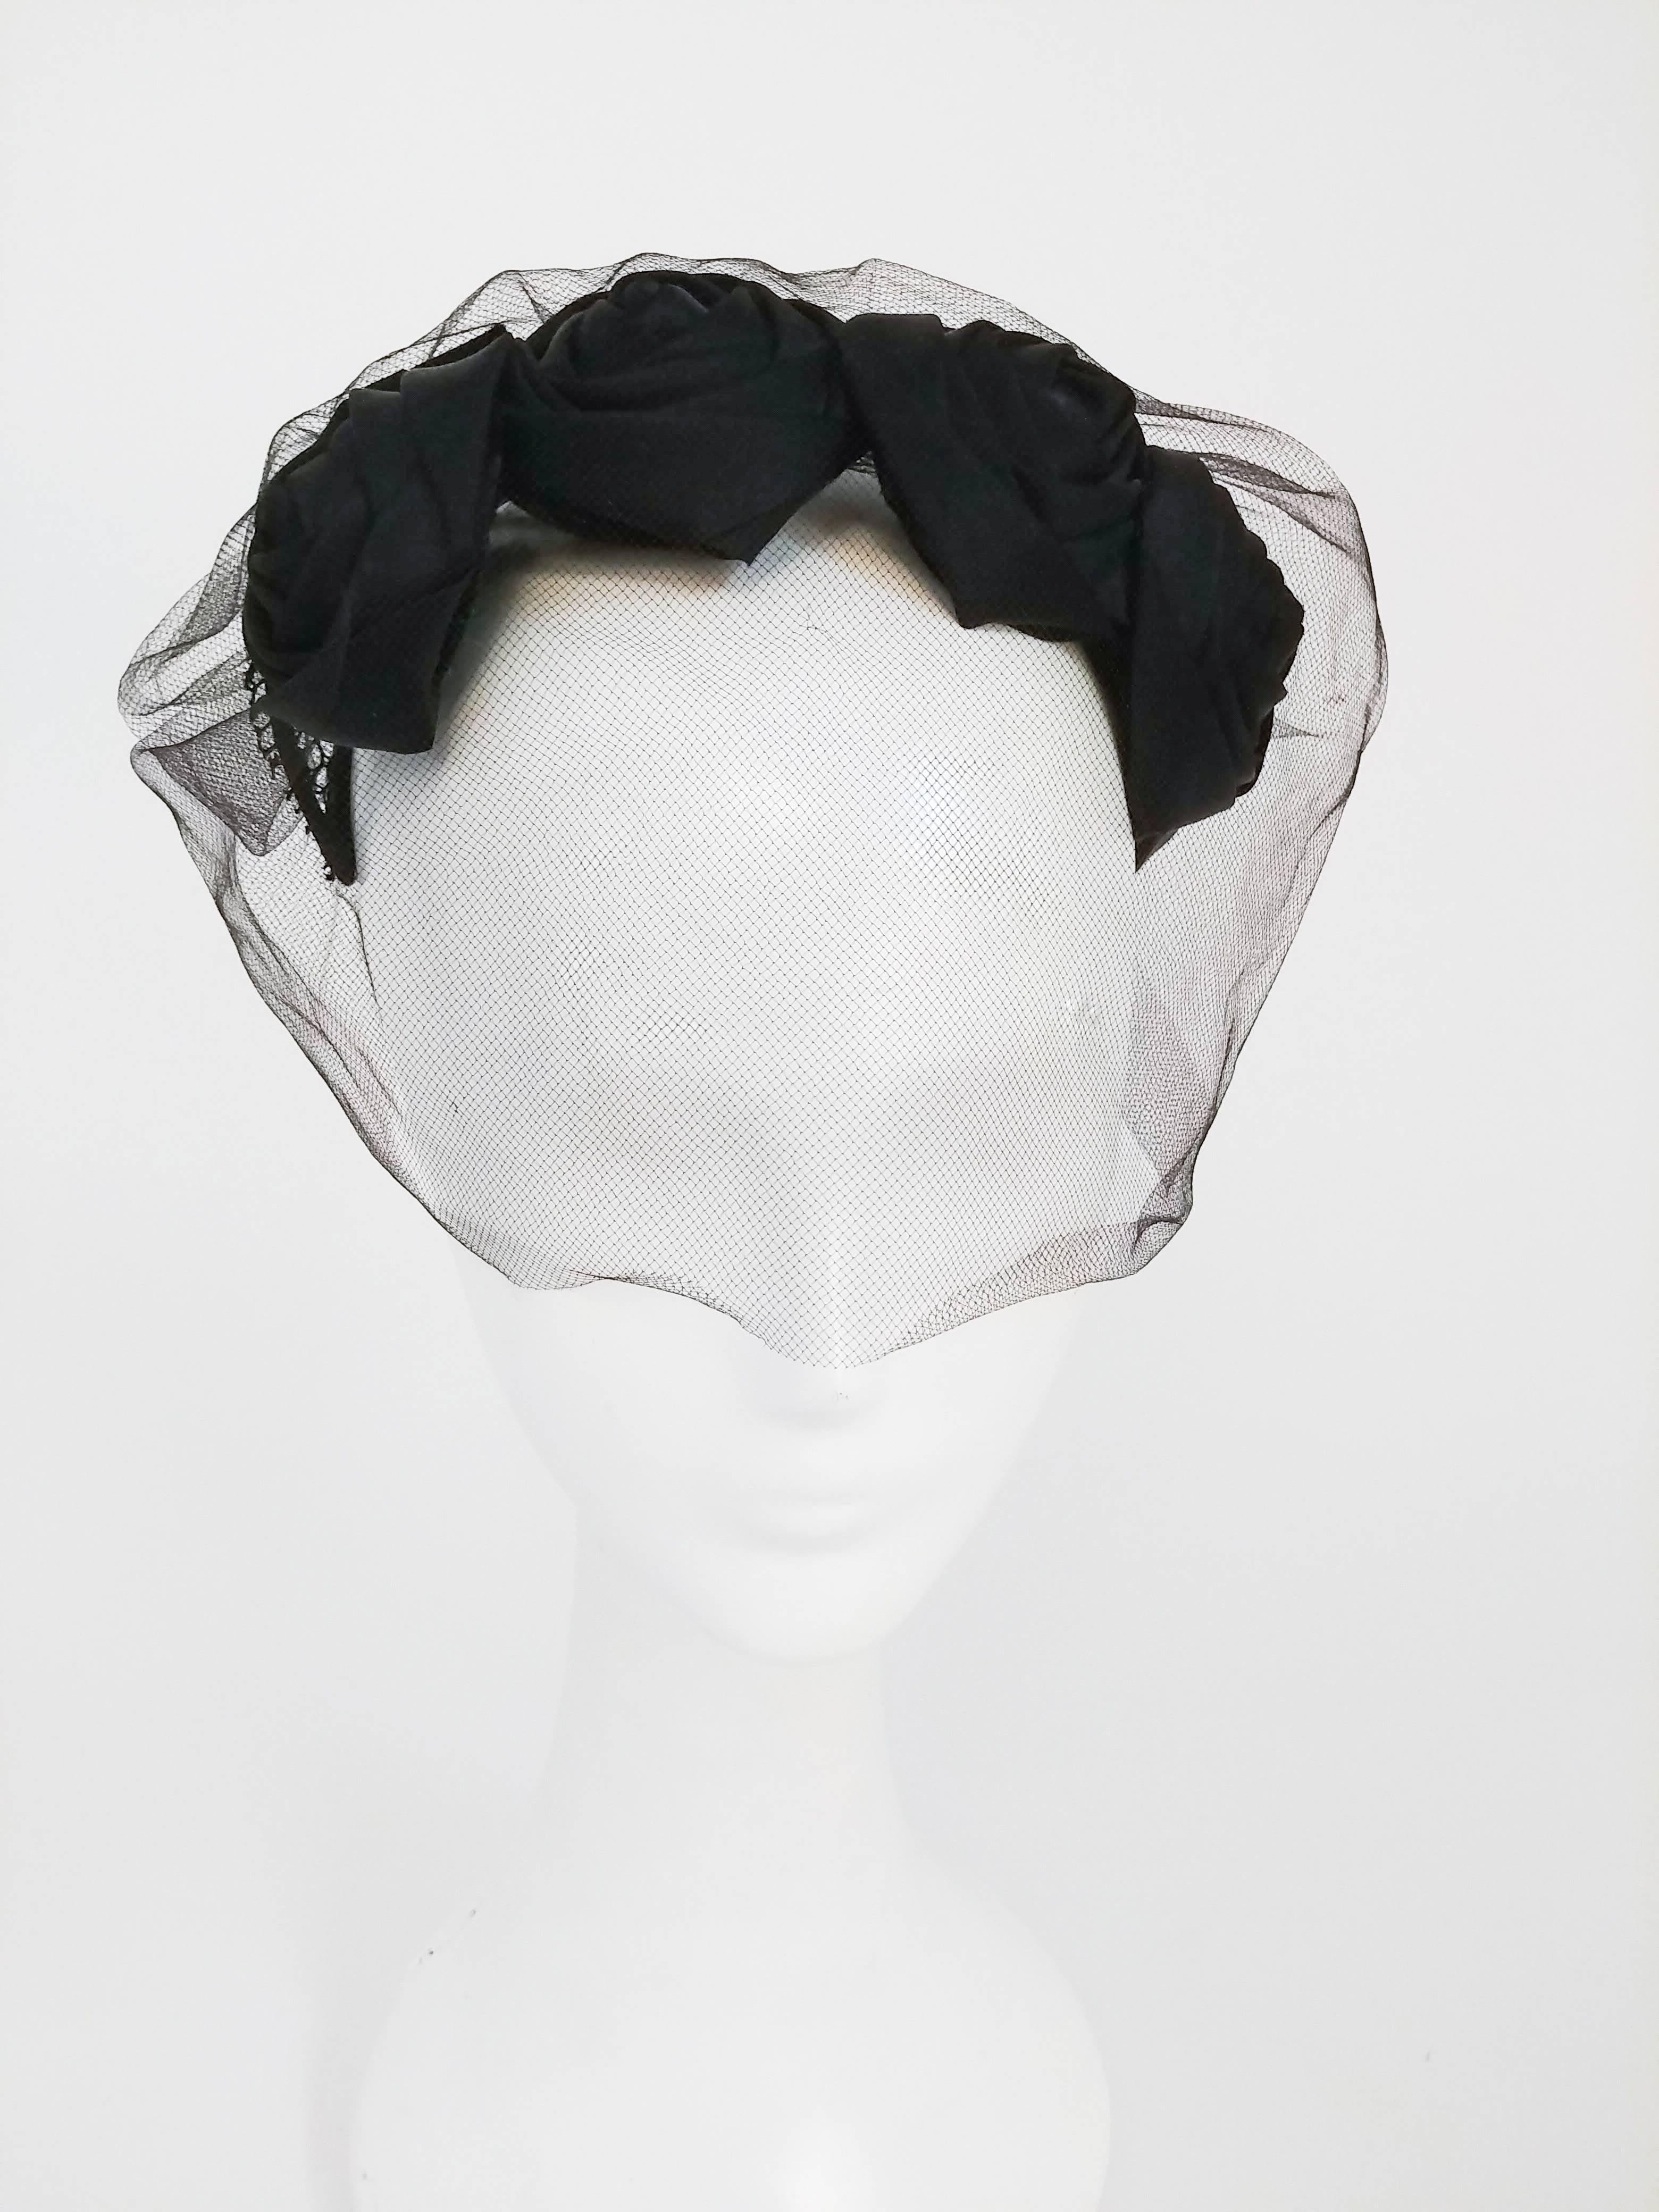 1950s Black Rose Cocktail Hat w/ Veil. Fits to head with adjustable wire. Decorative bow at back, mesh base, and tulle veil.